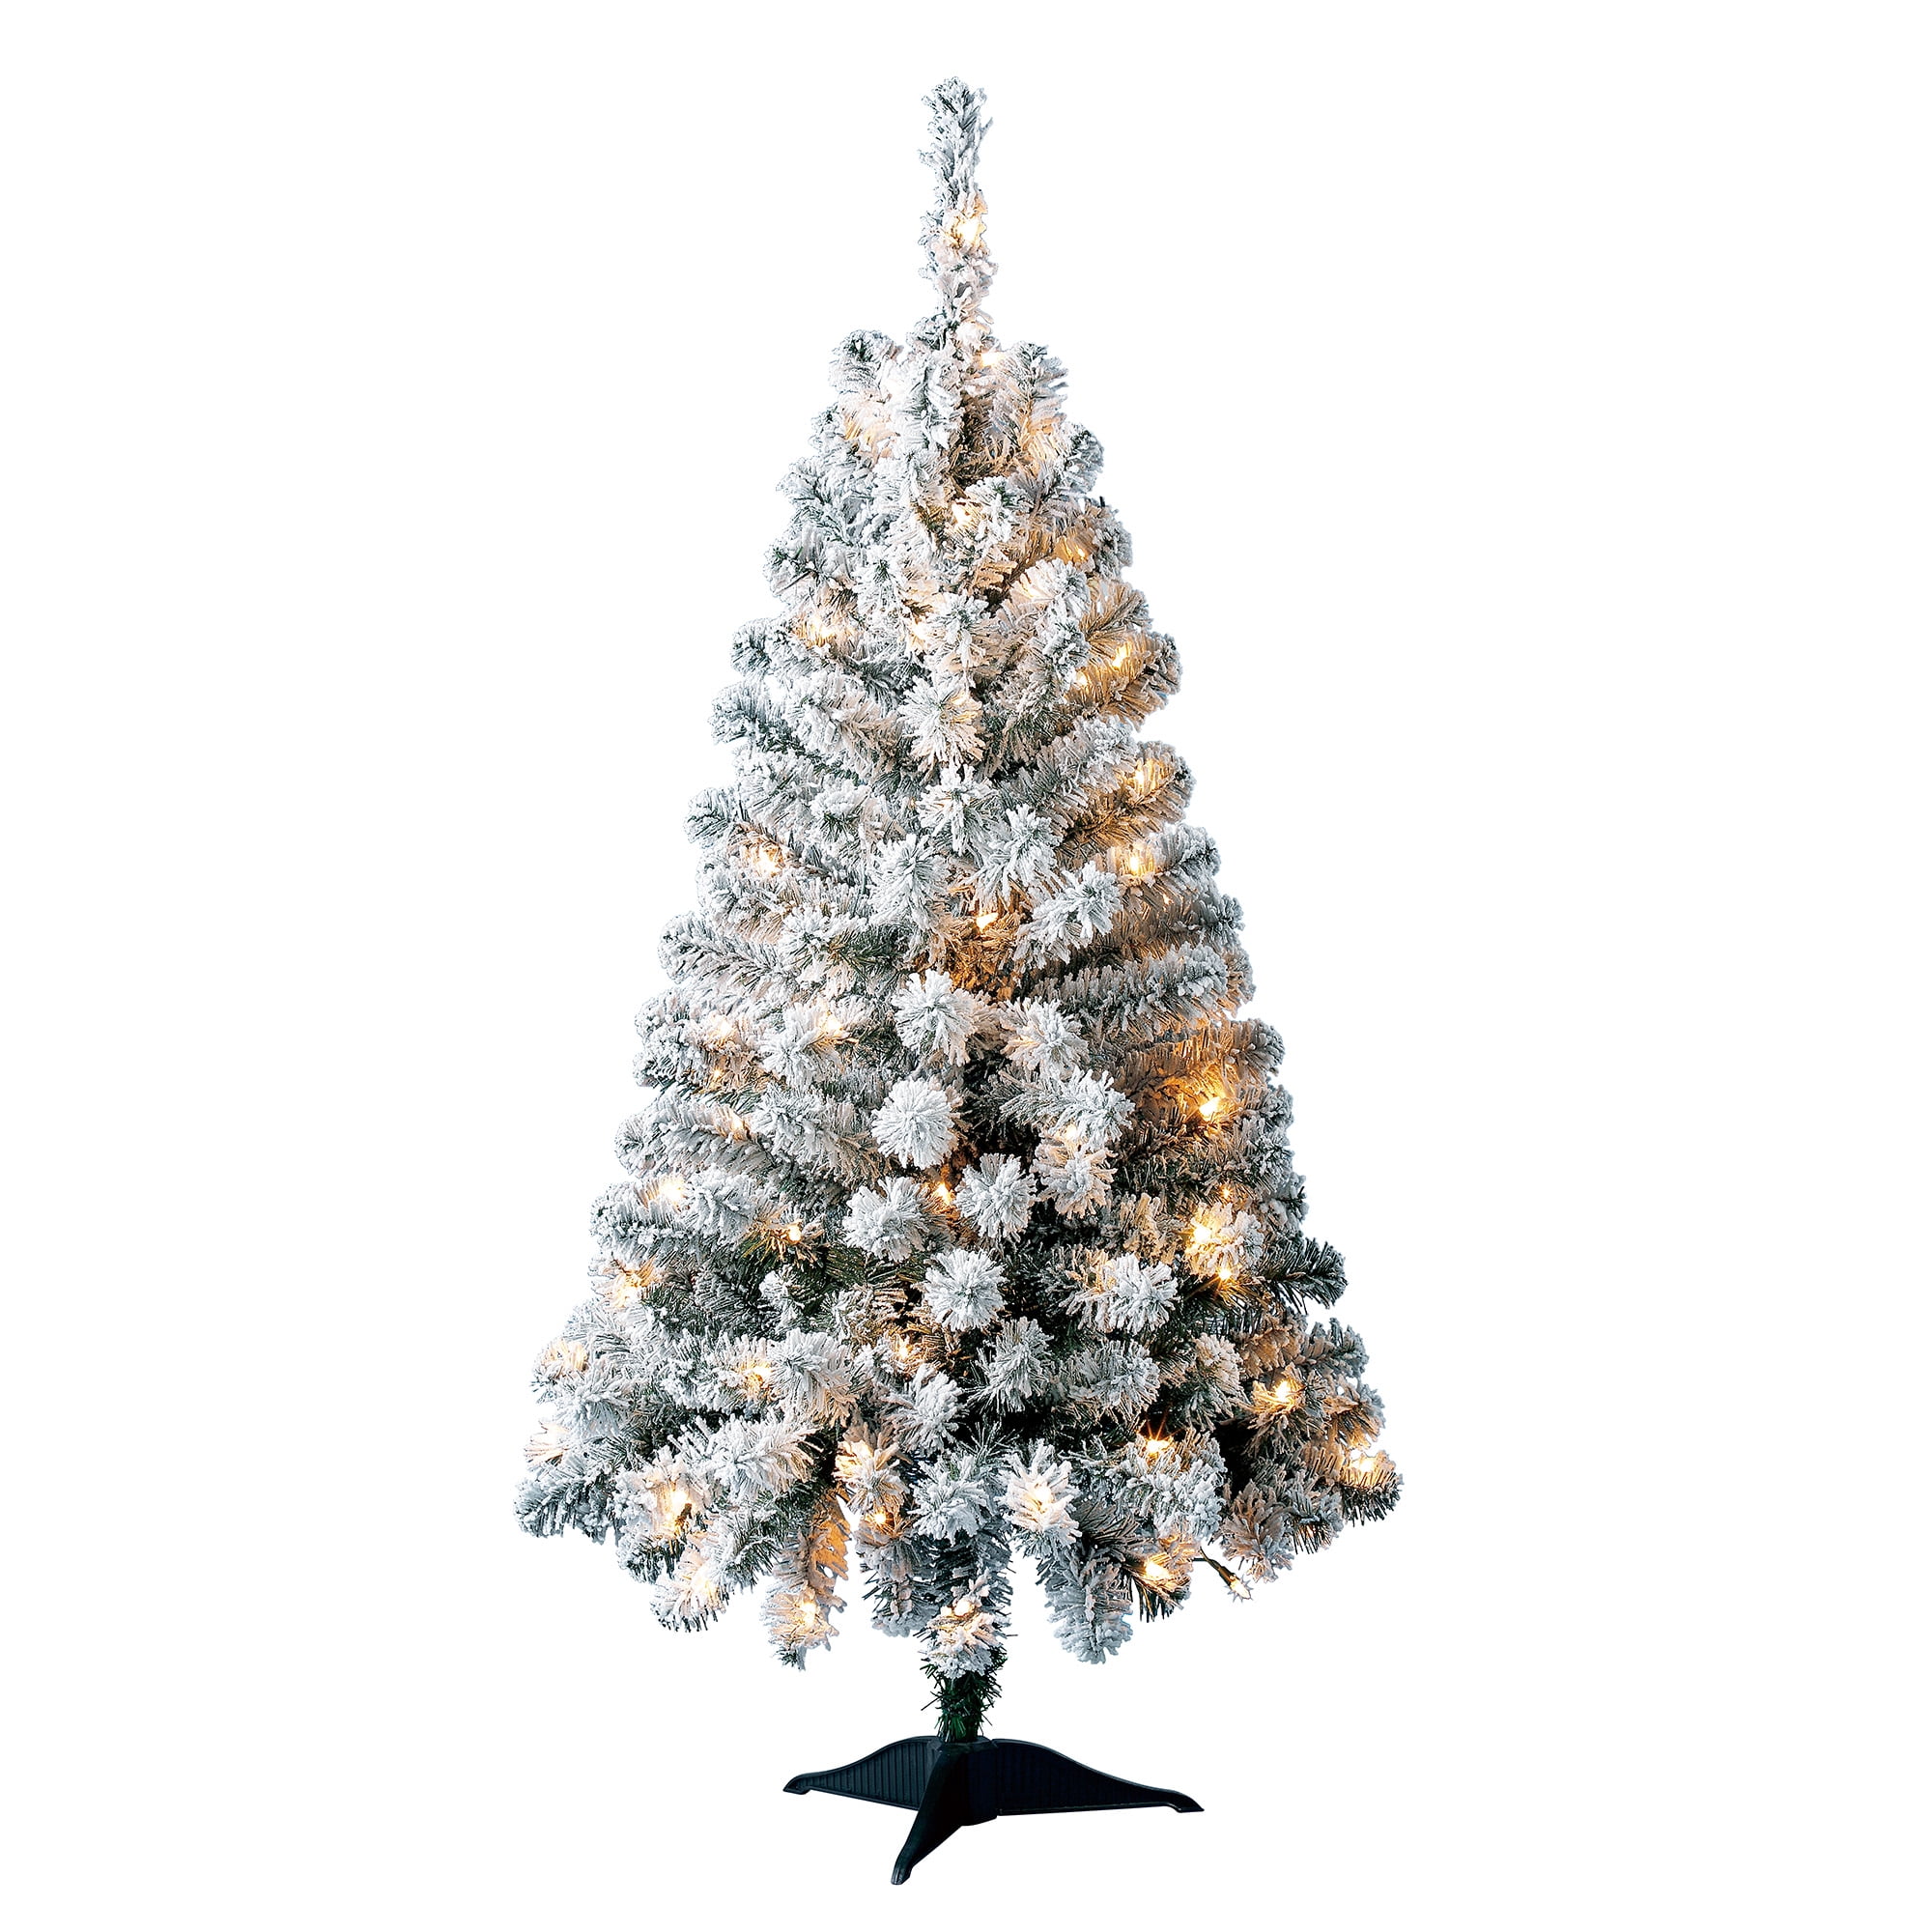 Details about   ALEKO 6 feet Artificial Holiday Snow-flocked Branches Pre-Lit Christmas Tree 